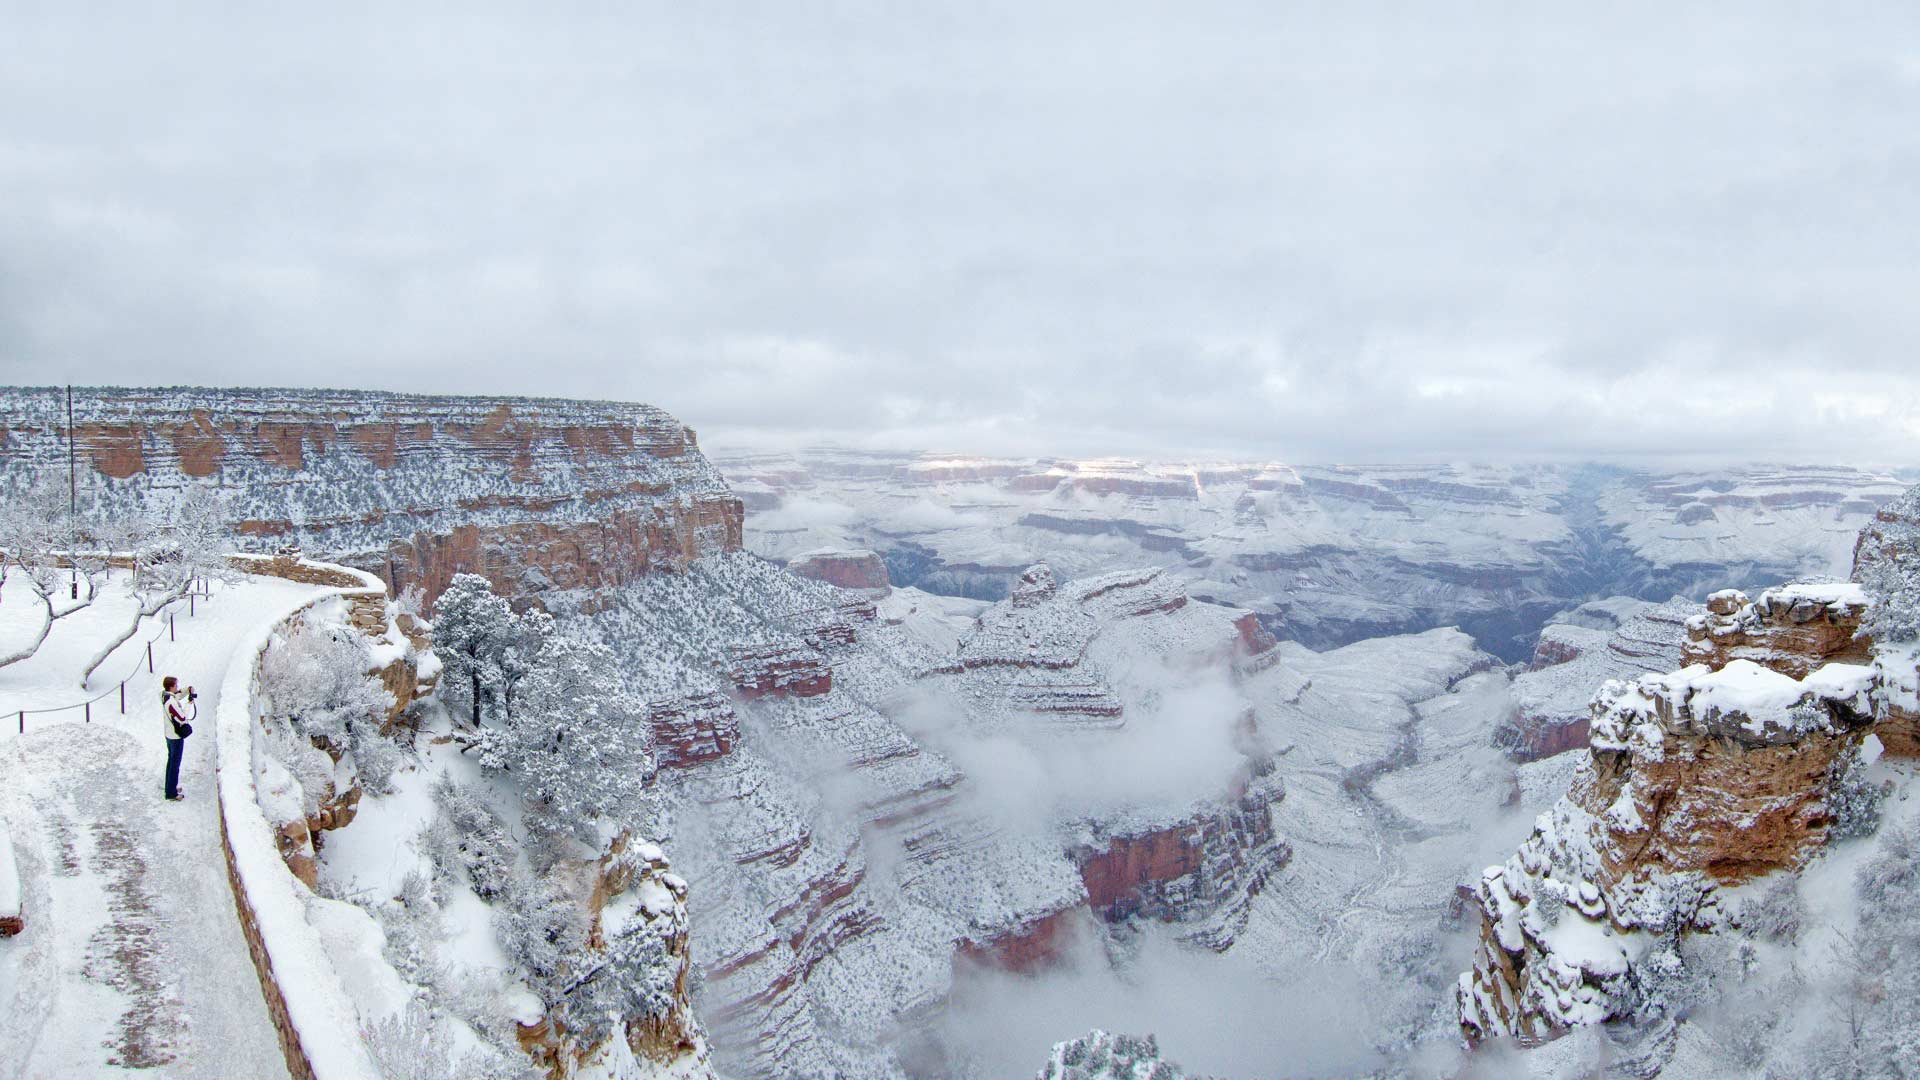 Snow blankets the Grand Canyon.